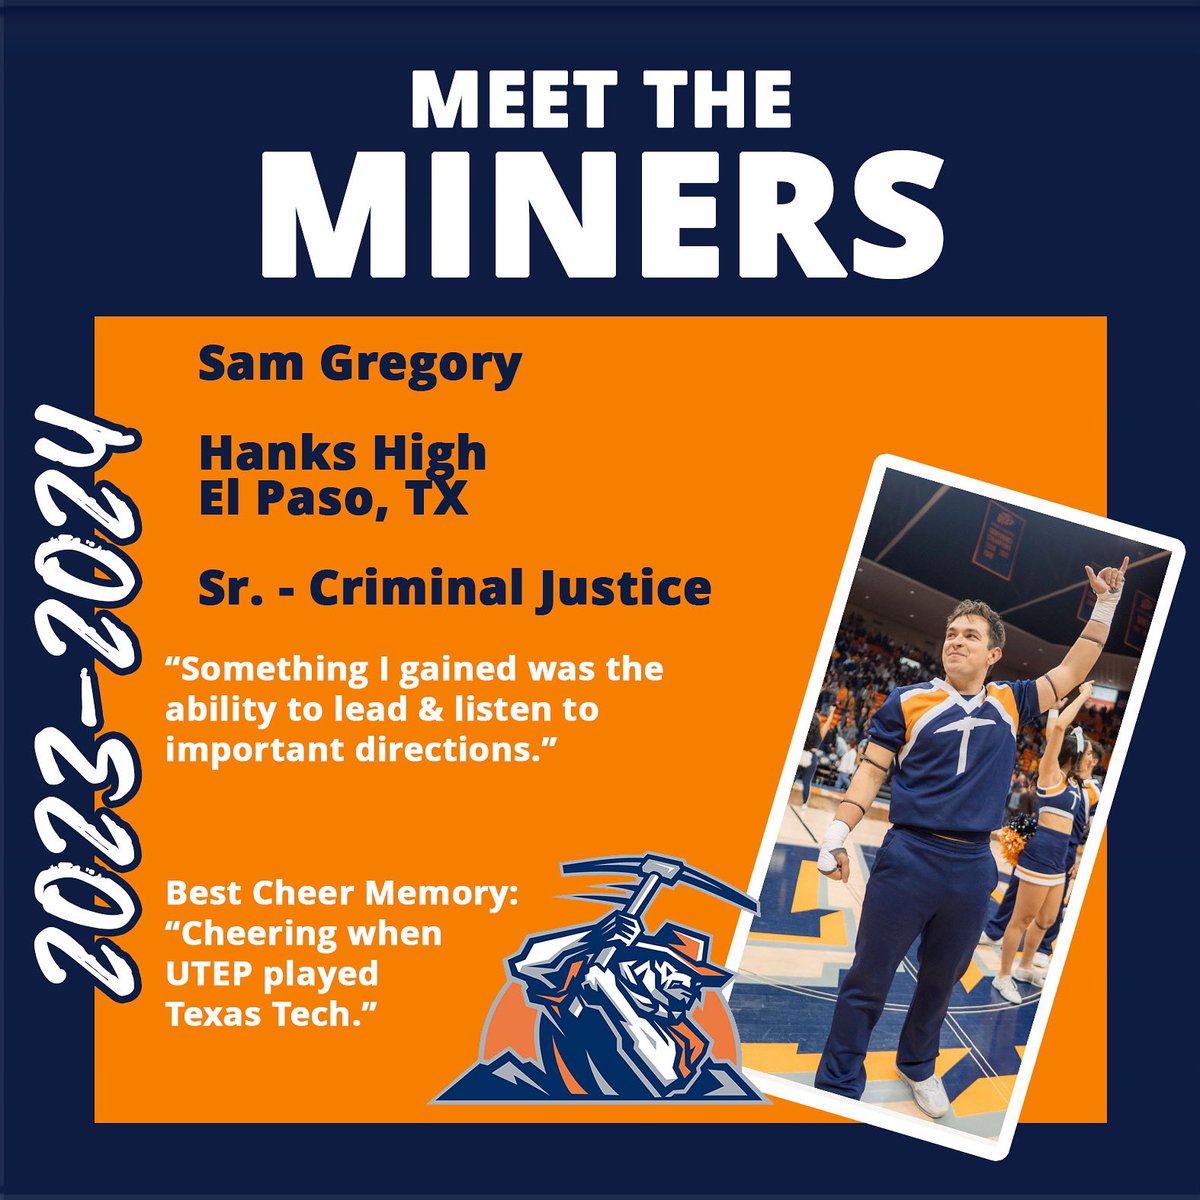 Welcome back to our 5th year Sam, we are looking forward to another amazing year! ⛏️
#picksup #gominers